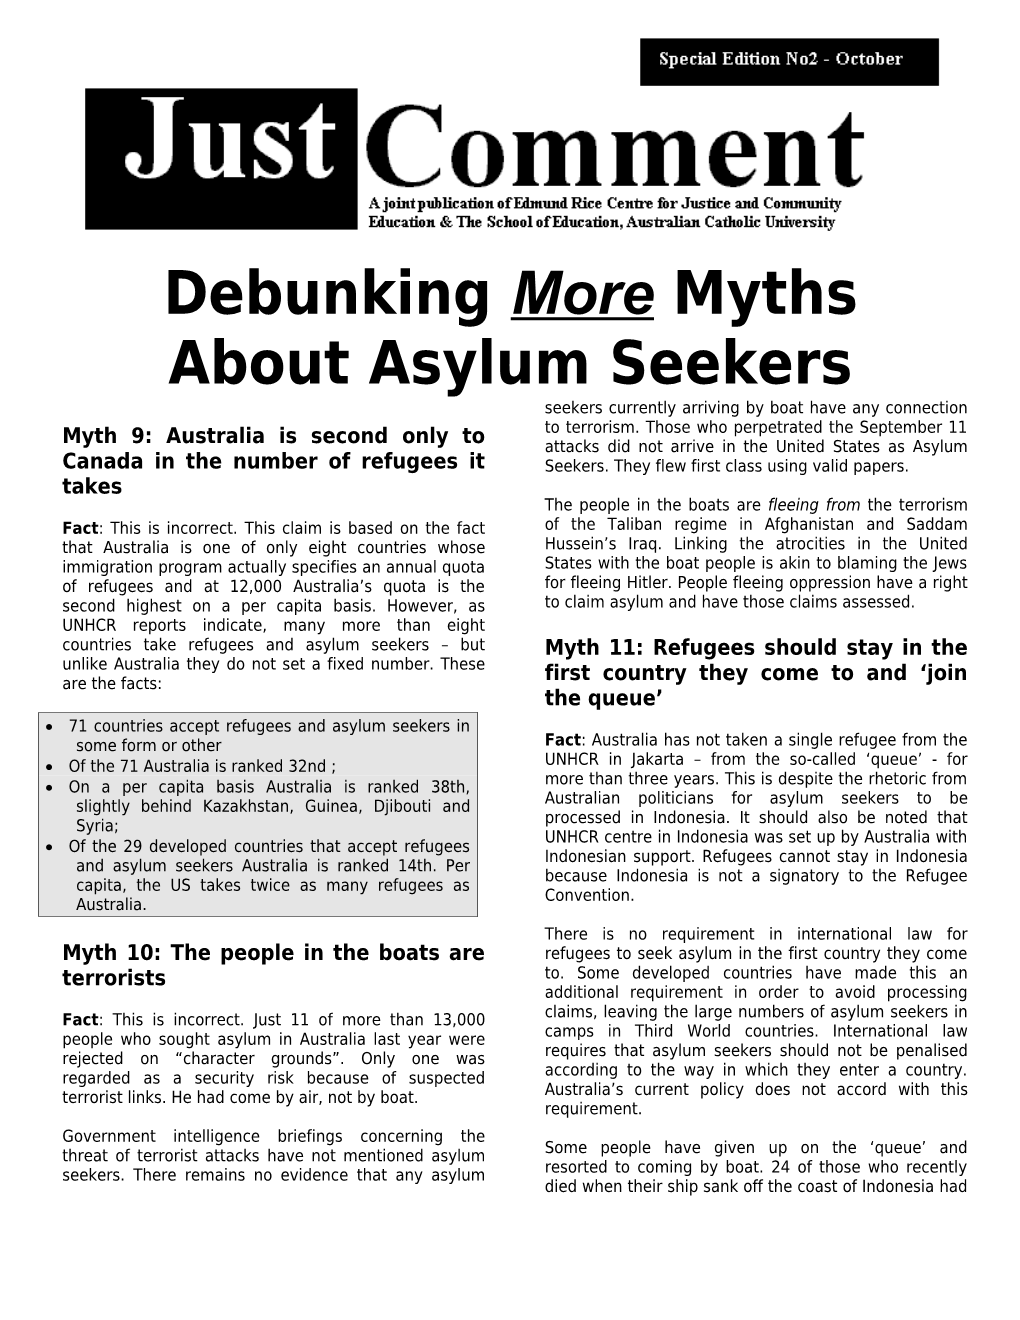 Debunking More Myths About Asylum Seekers